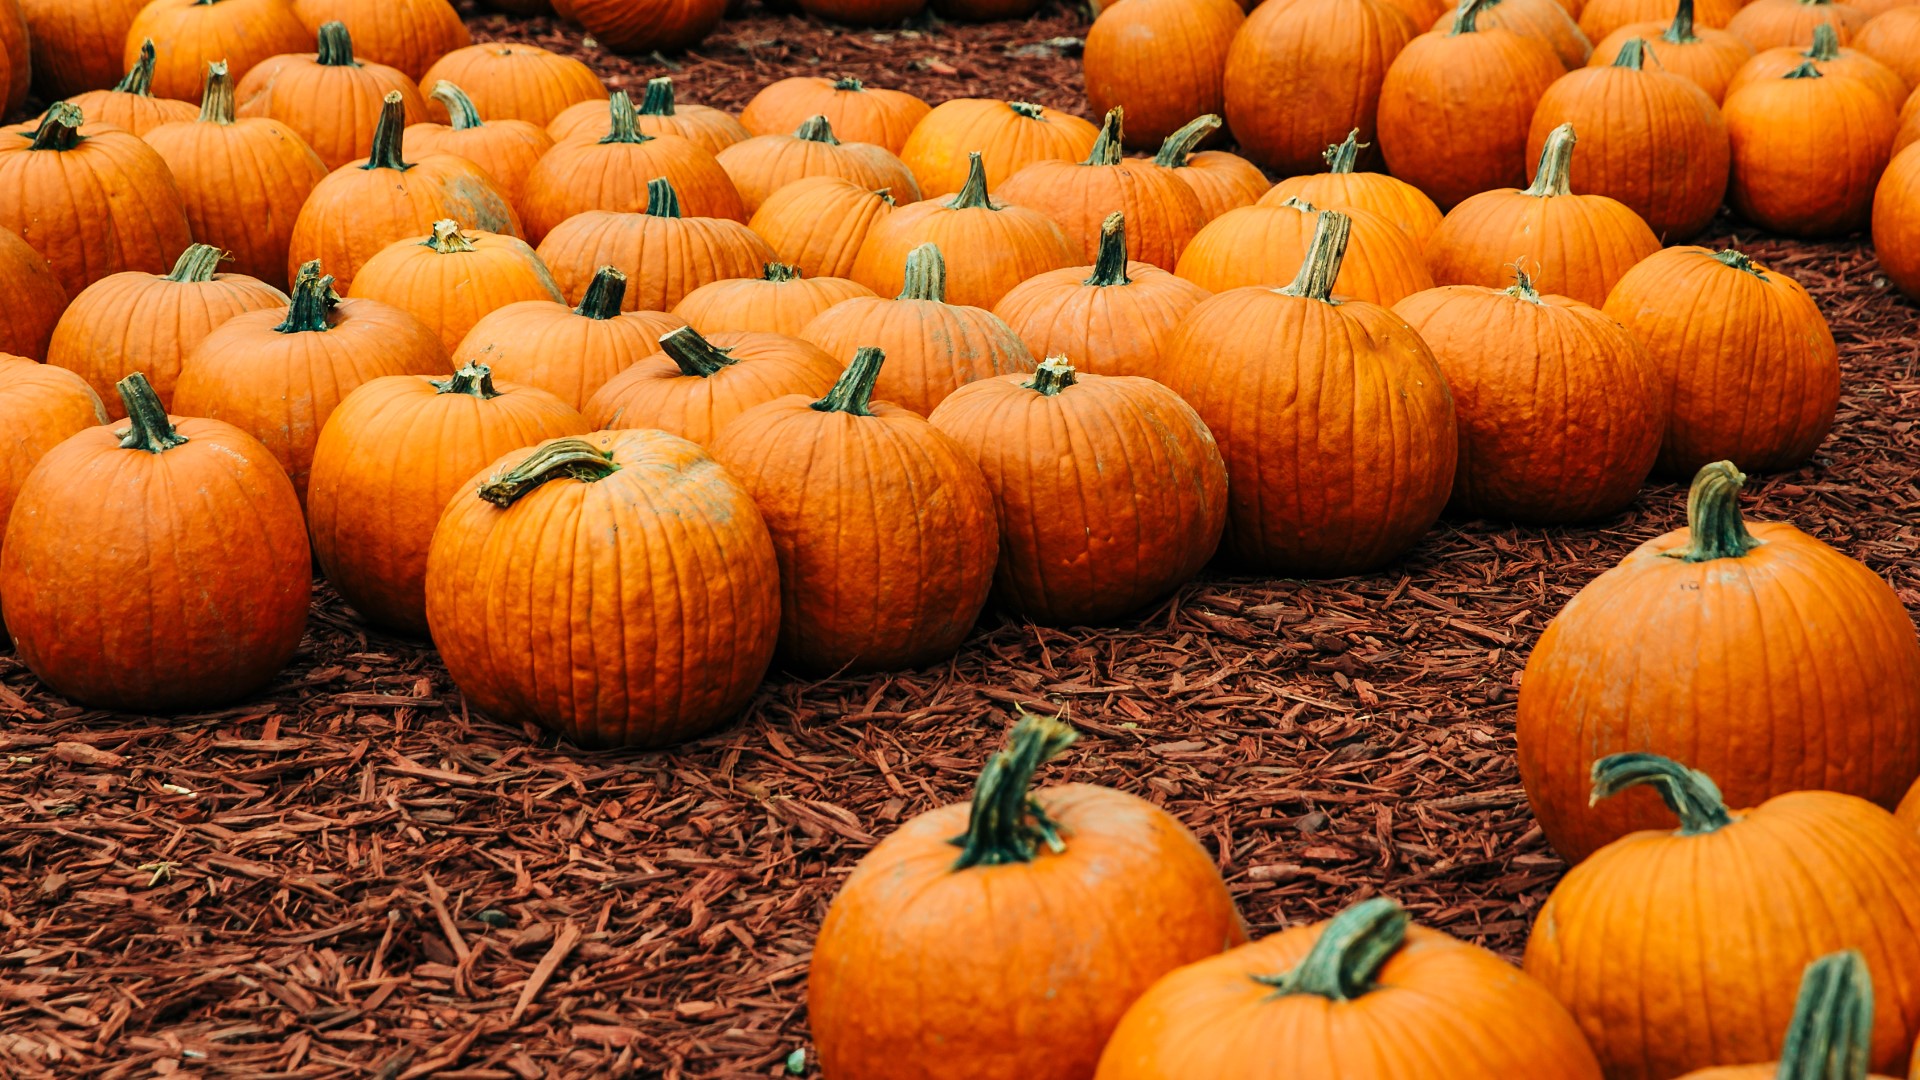 This weekend features some great opportunities to get outside and experience autumn in Colorado with pumpkin patches, hayrides, corn mazes & festivals. 10/10/2019.